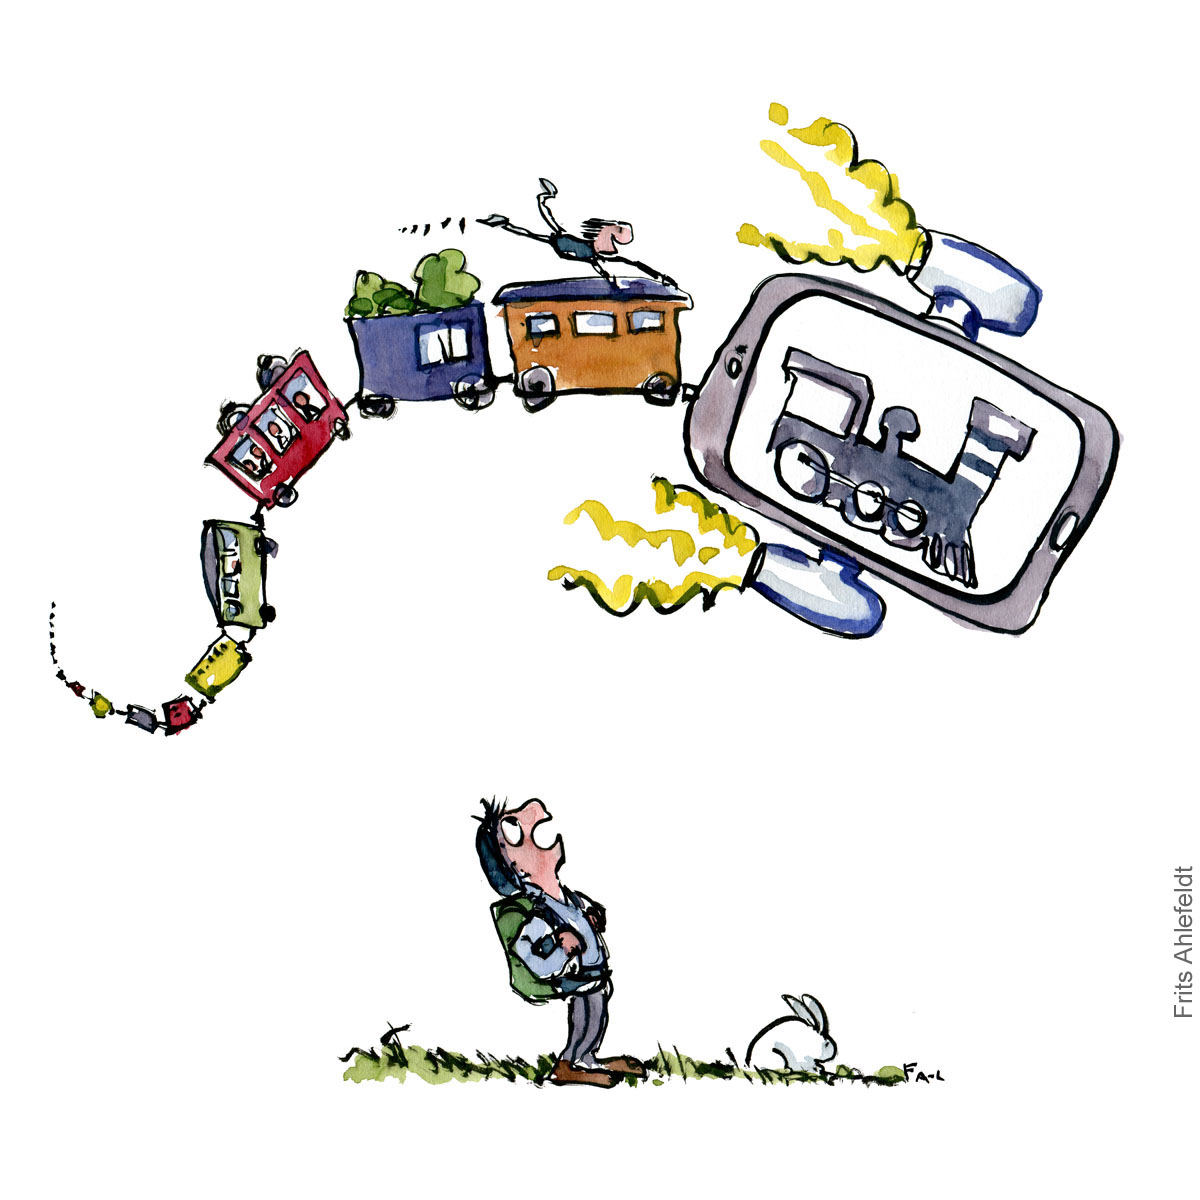 Drawing of a flying phone with a train on it. A hiker watching it. illustration handmade by Frits Ahlefeldt